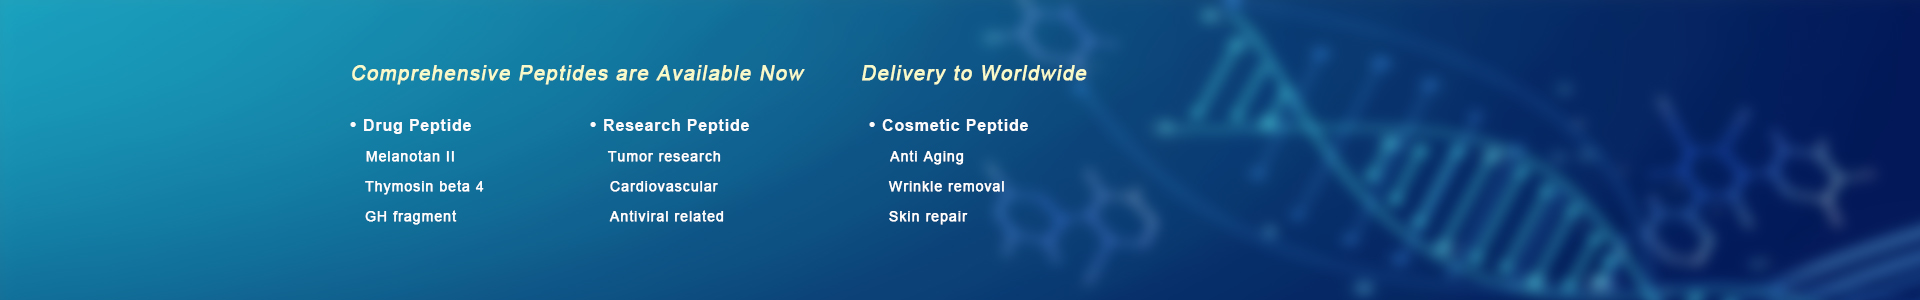 Peptide Products